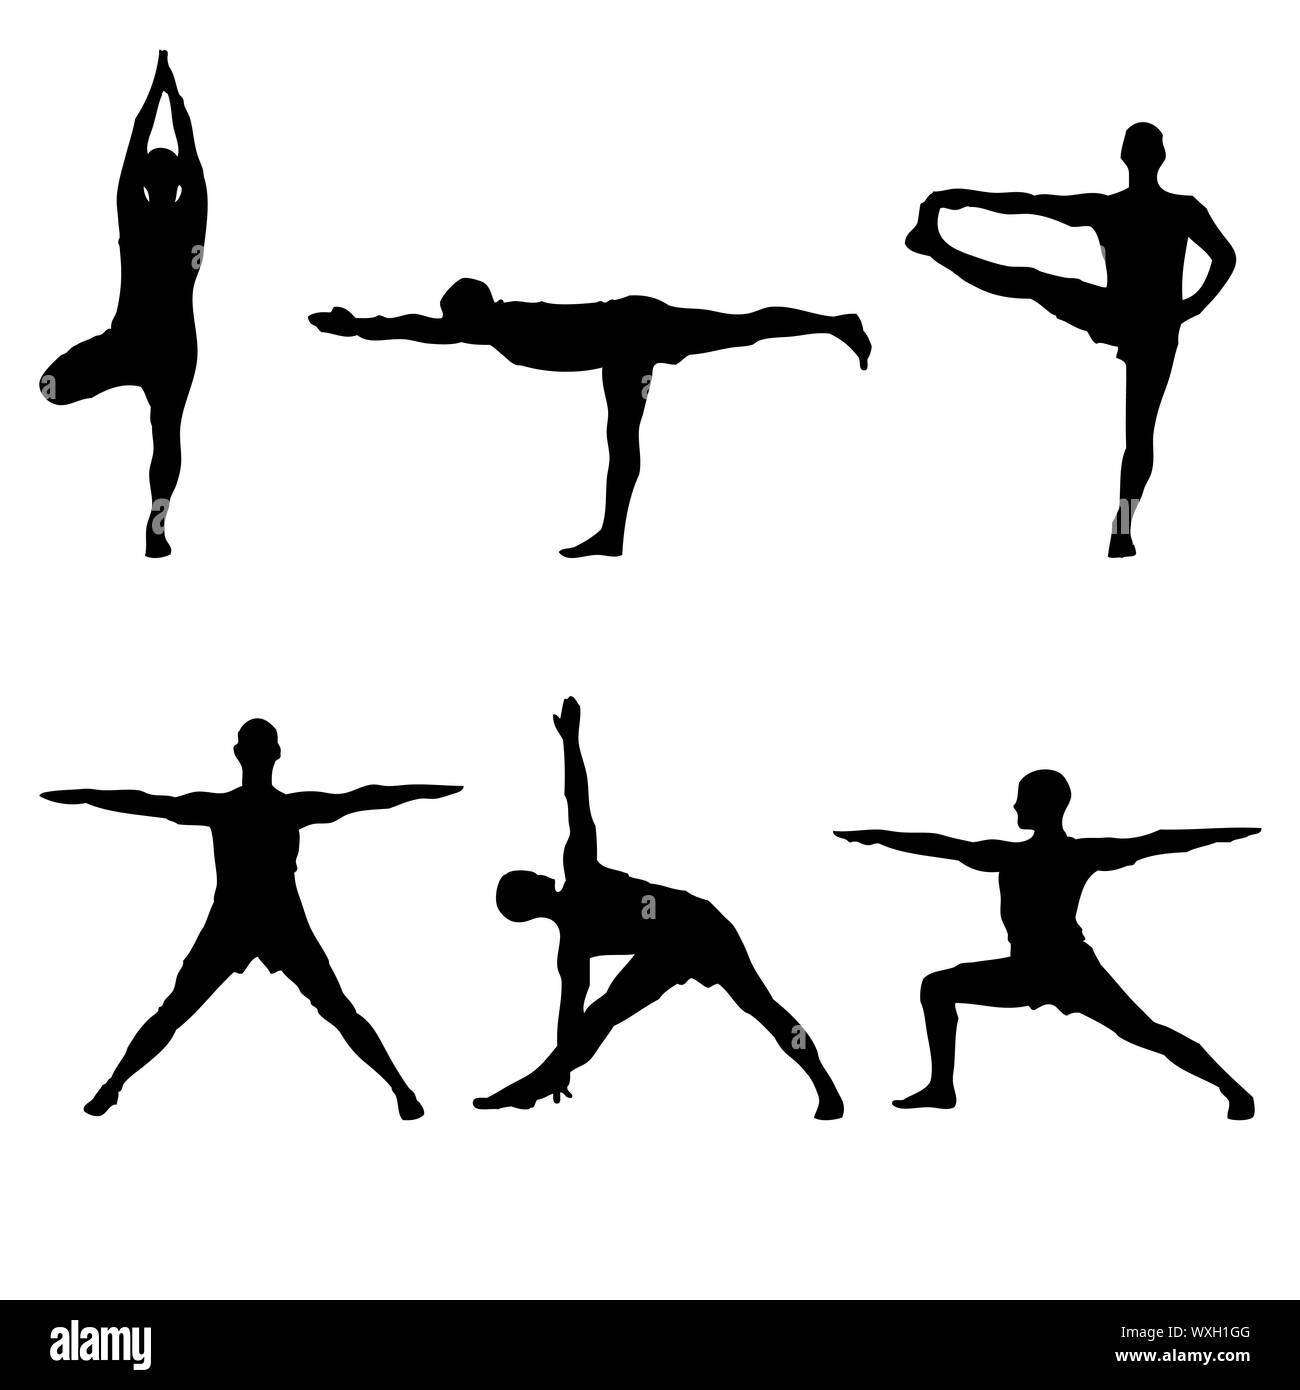 A batch of six yoga standing poses black silhouettes Stock Photo - Alamy